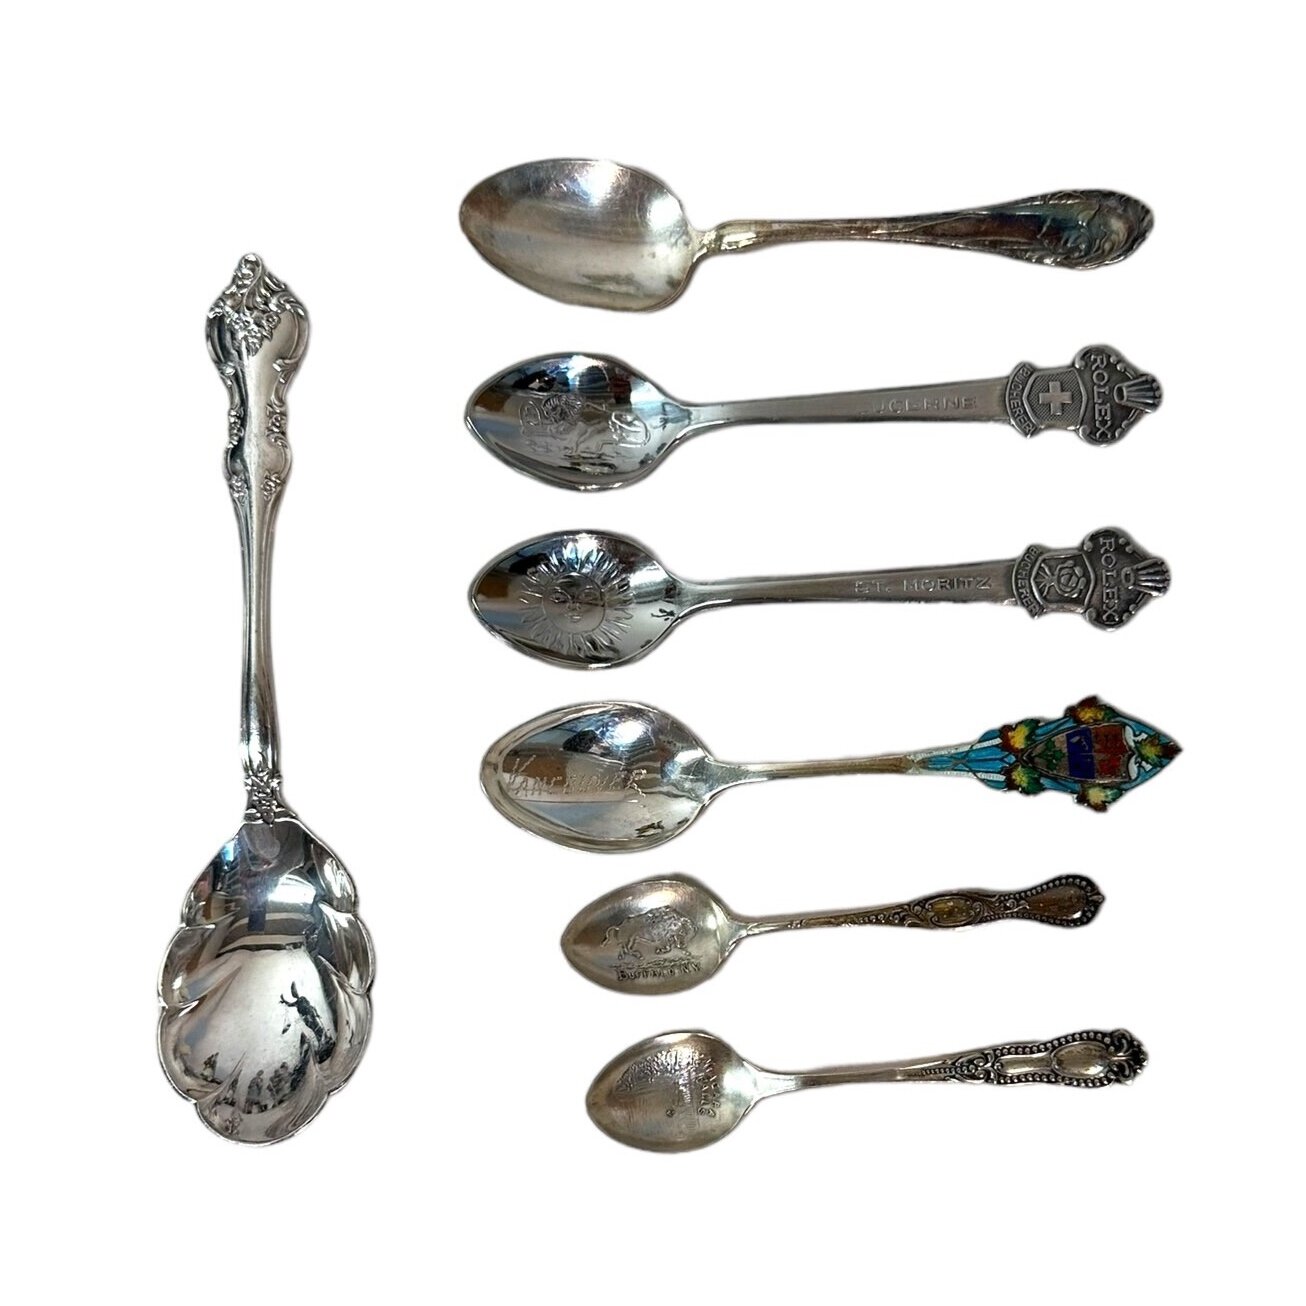 Spoons - Lefebvre's Source For Adventure